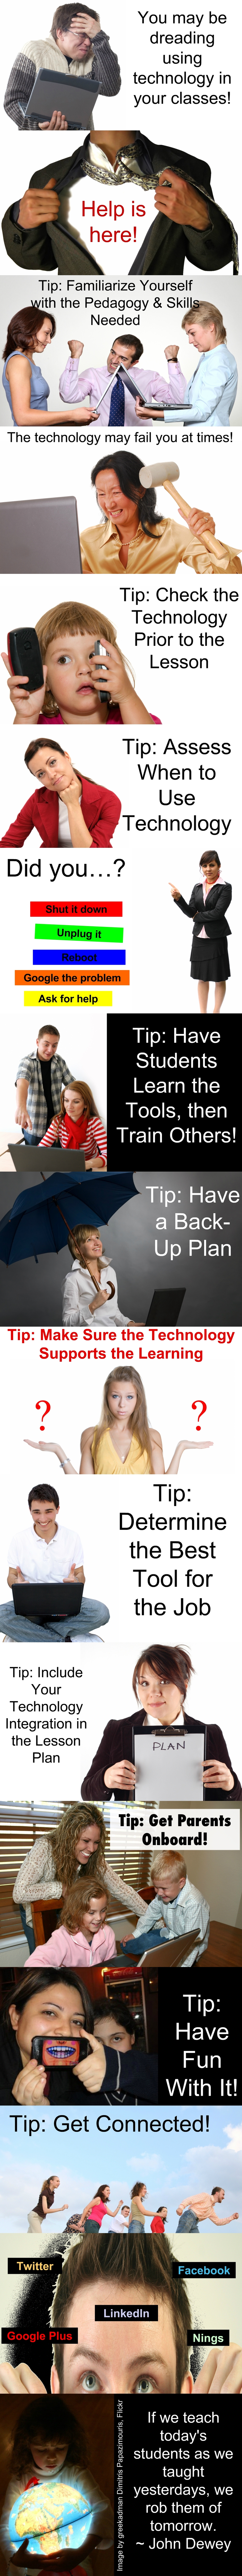 Survival Tips for Teaching with Technology